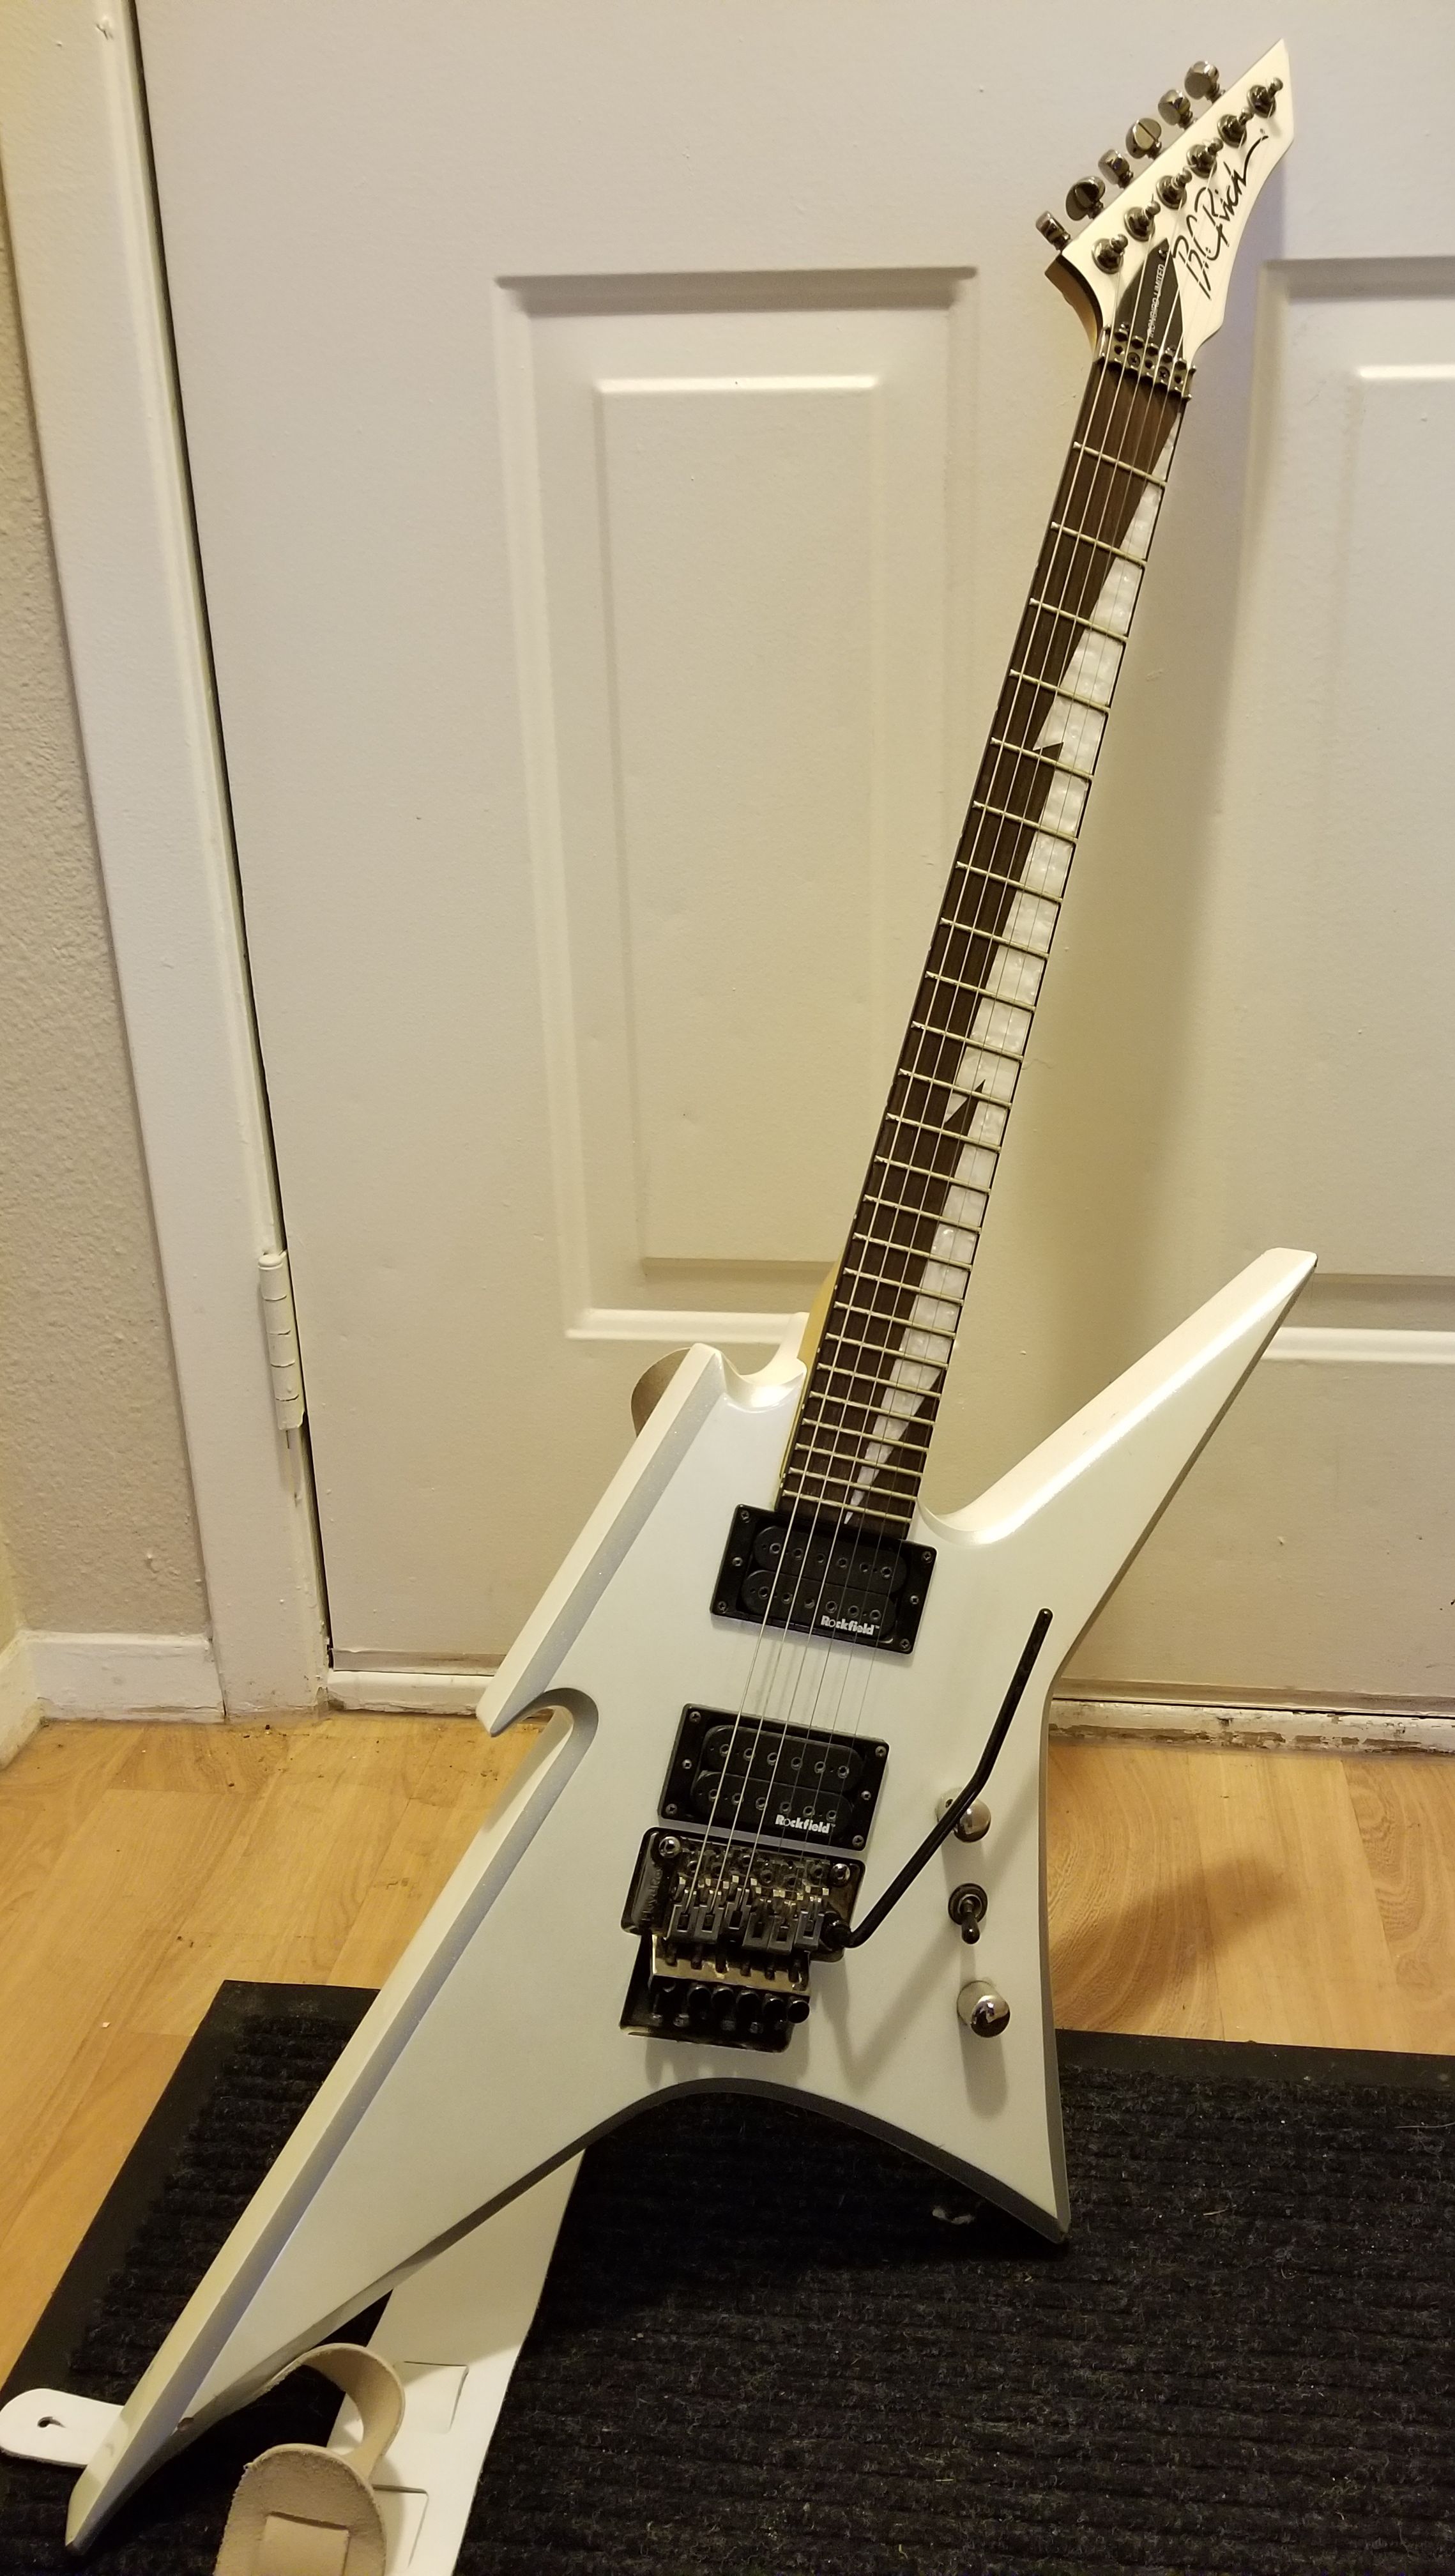 LIMITED EDITION BC RICH IRONBIRD GUITAR for Sale in Tigard, OR - OfferUp